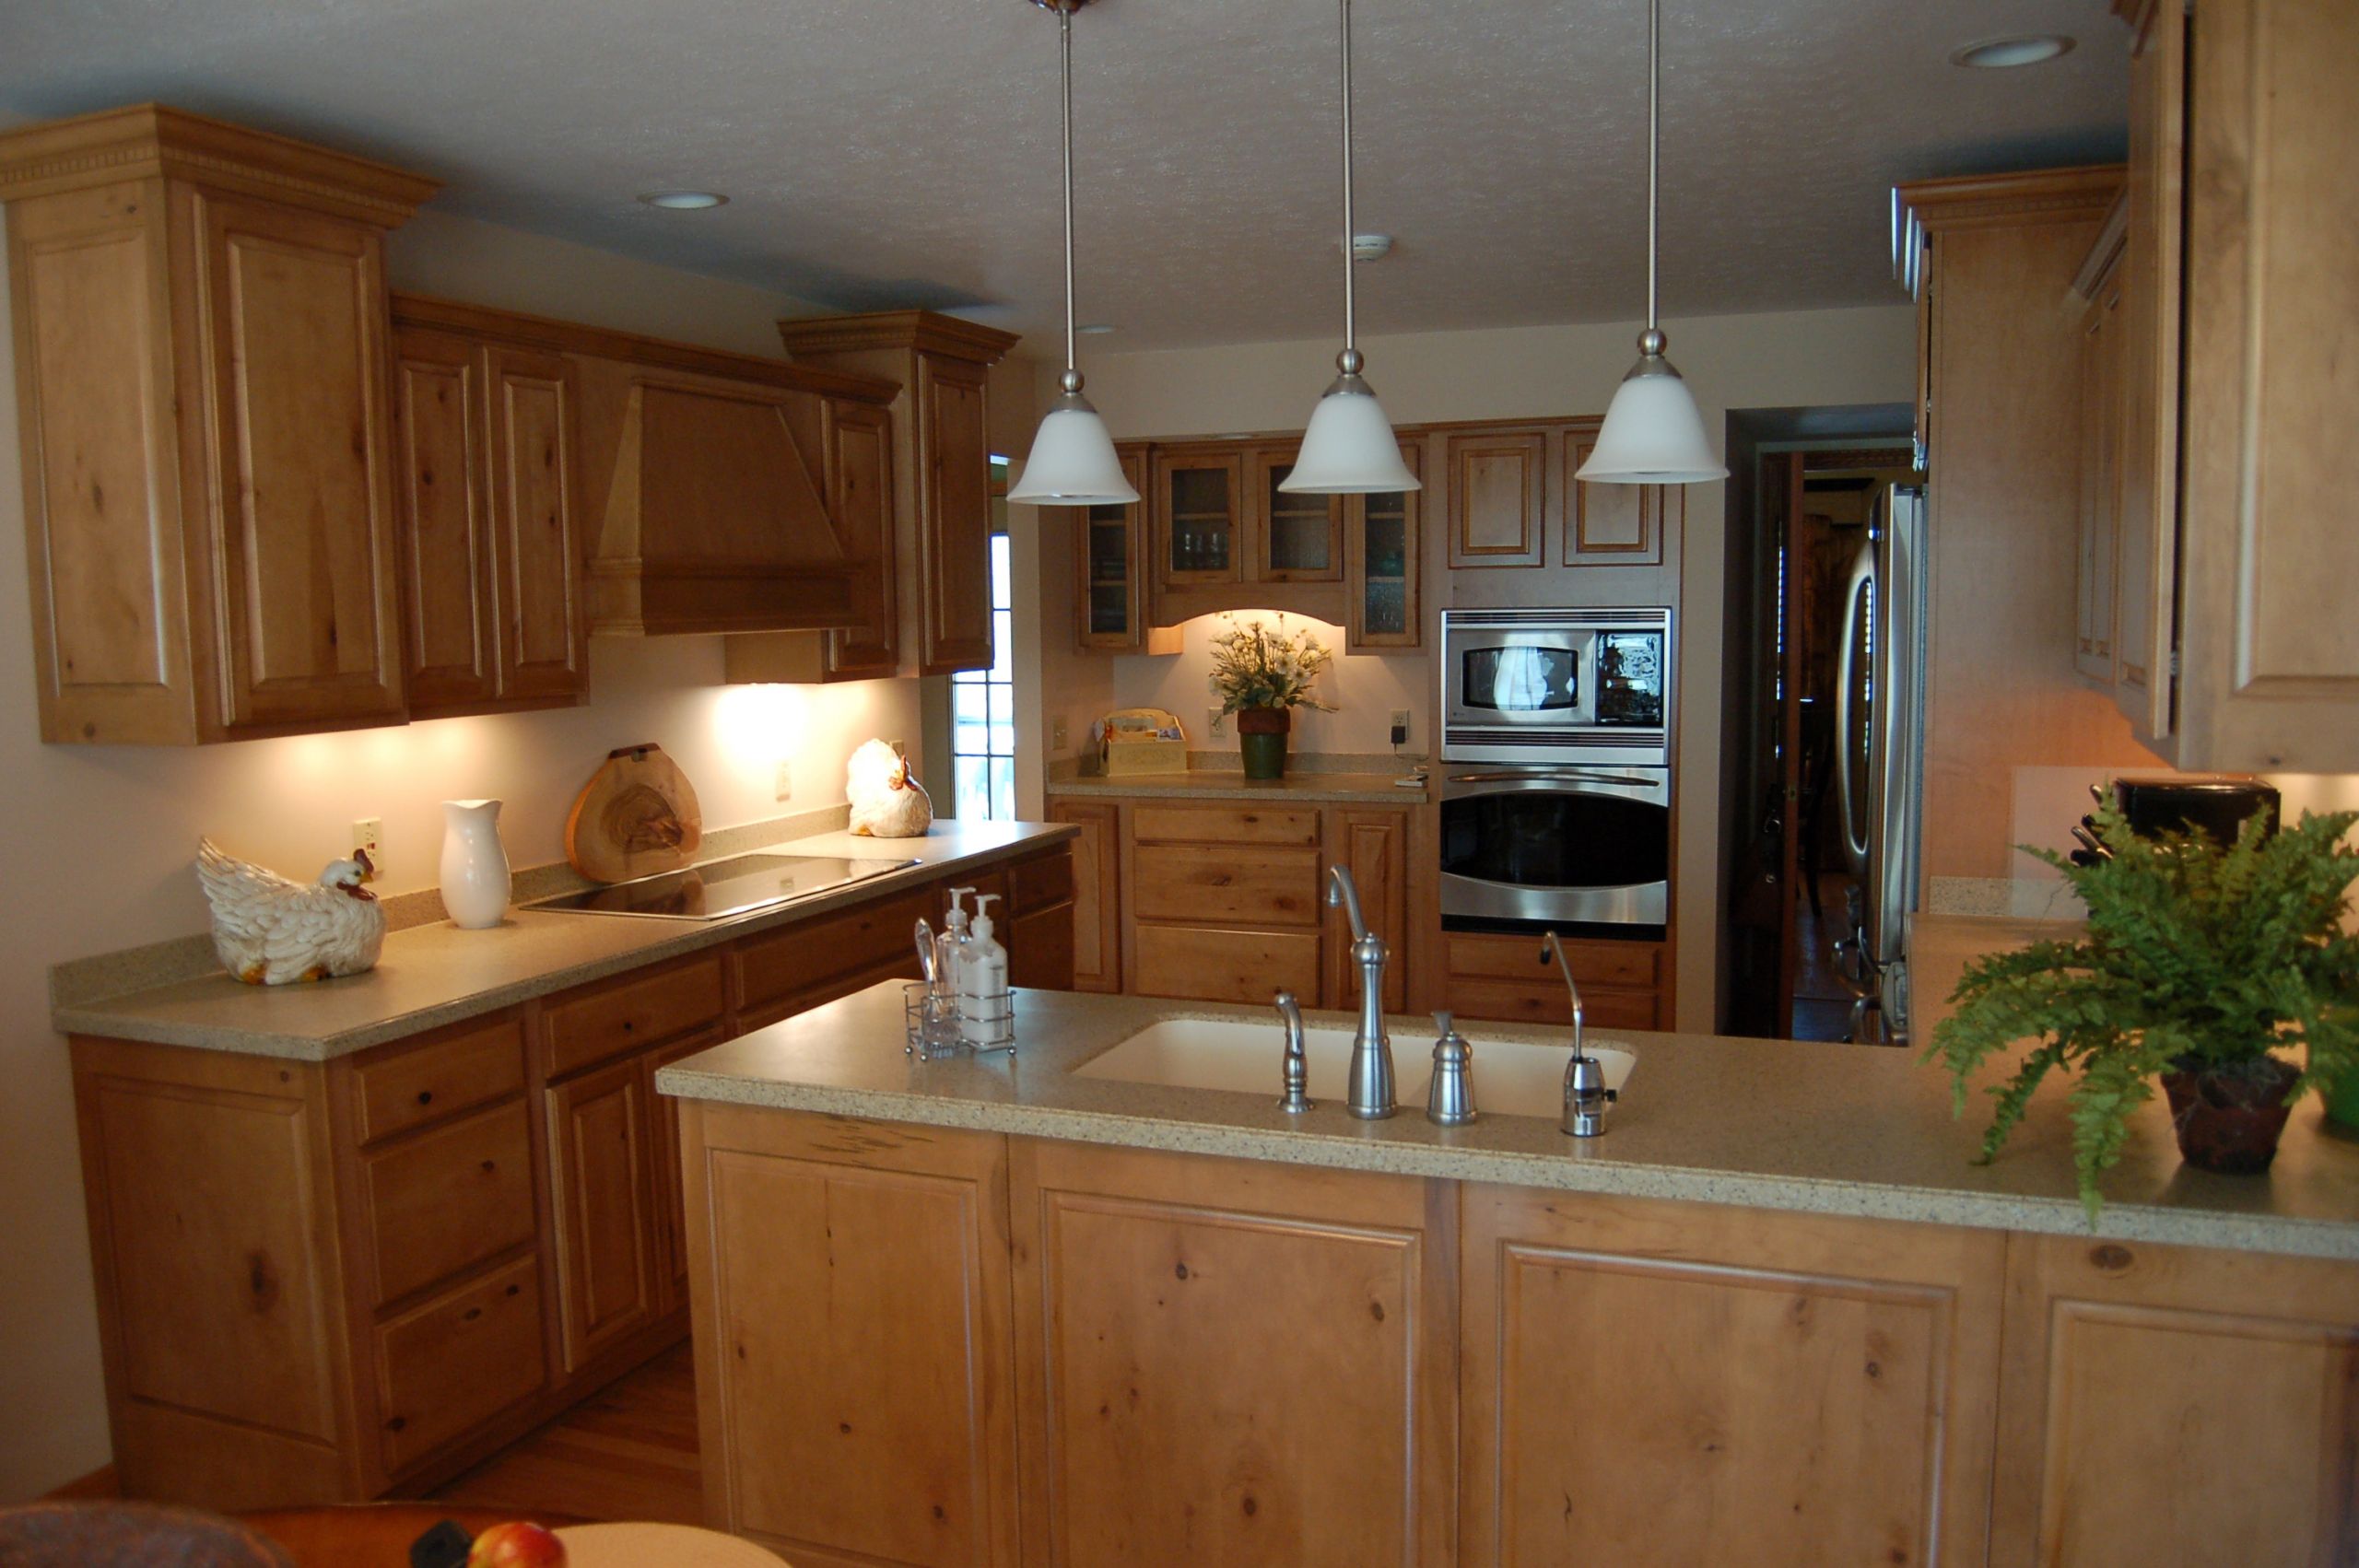 Complete Kitchen Remodeling
 10 Mistakes to Avoid While Remodeling Your House